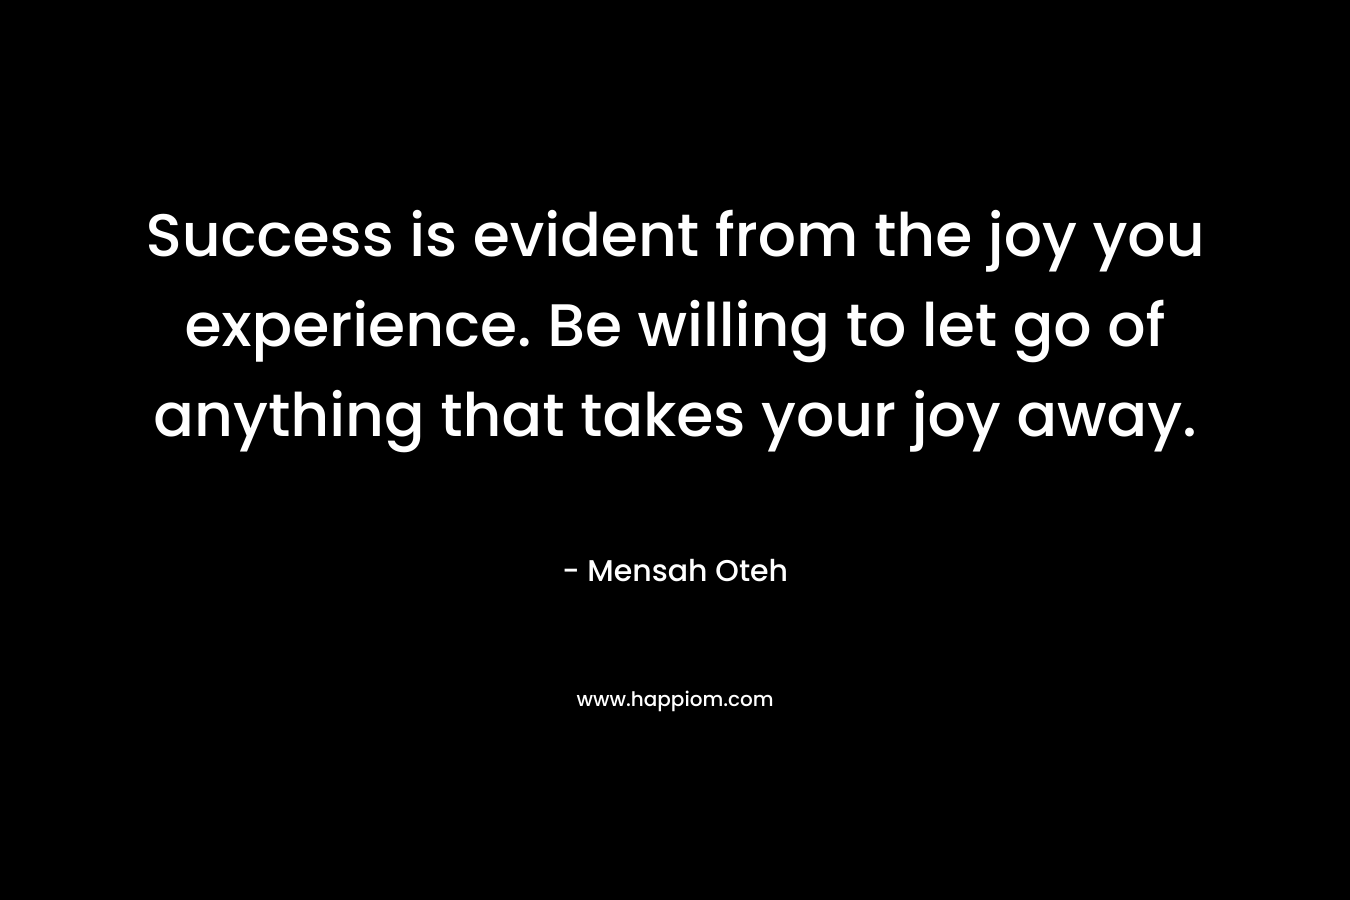 Success is evident from the joy you experience. Be willing to let go of anything that takes your joy away.